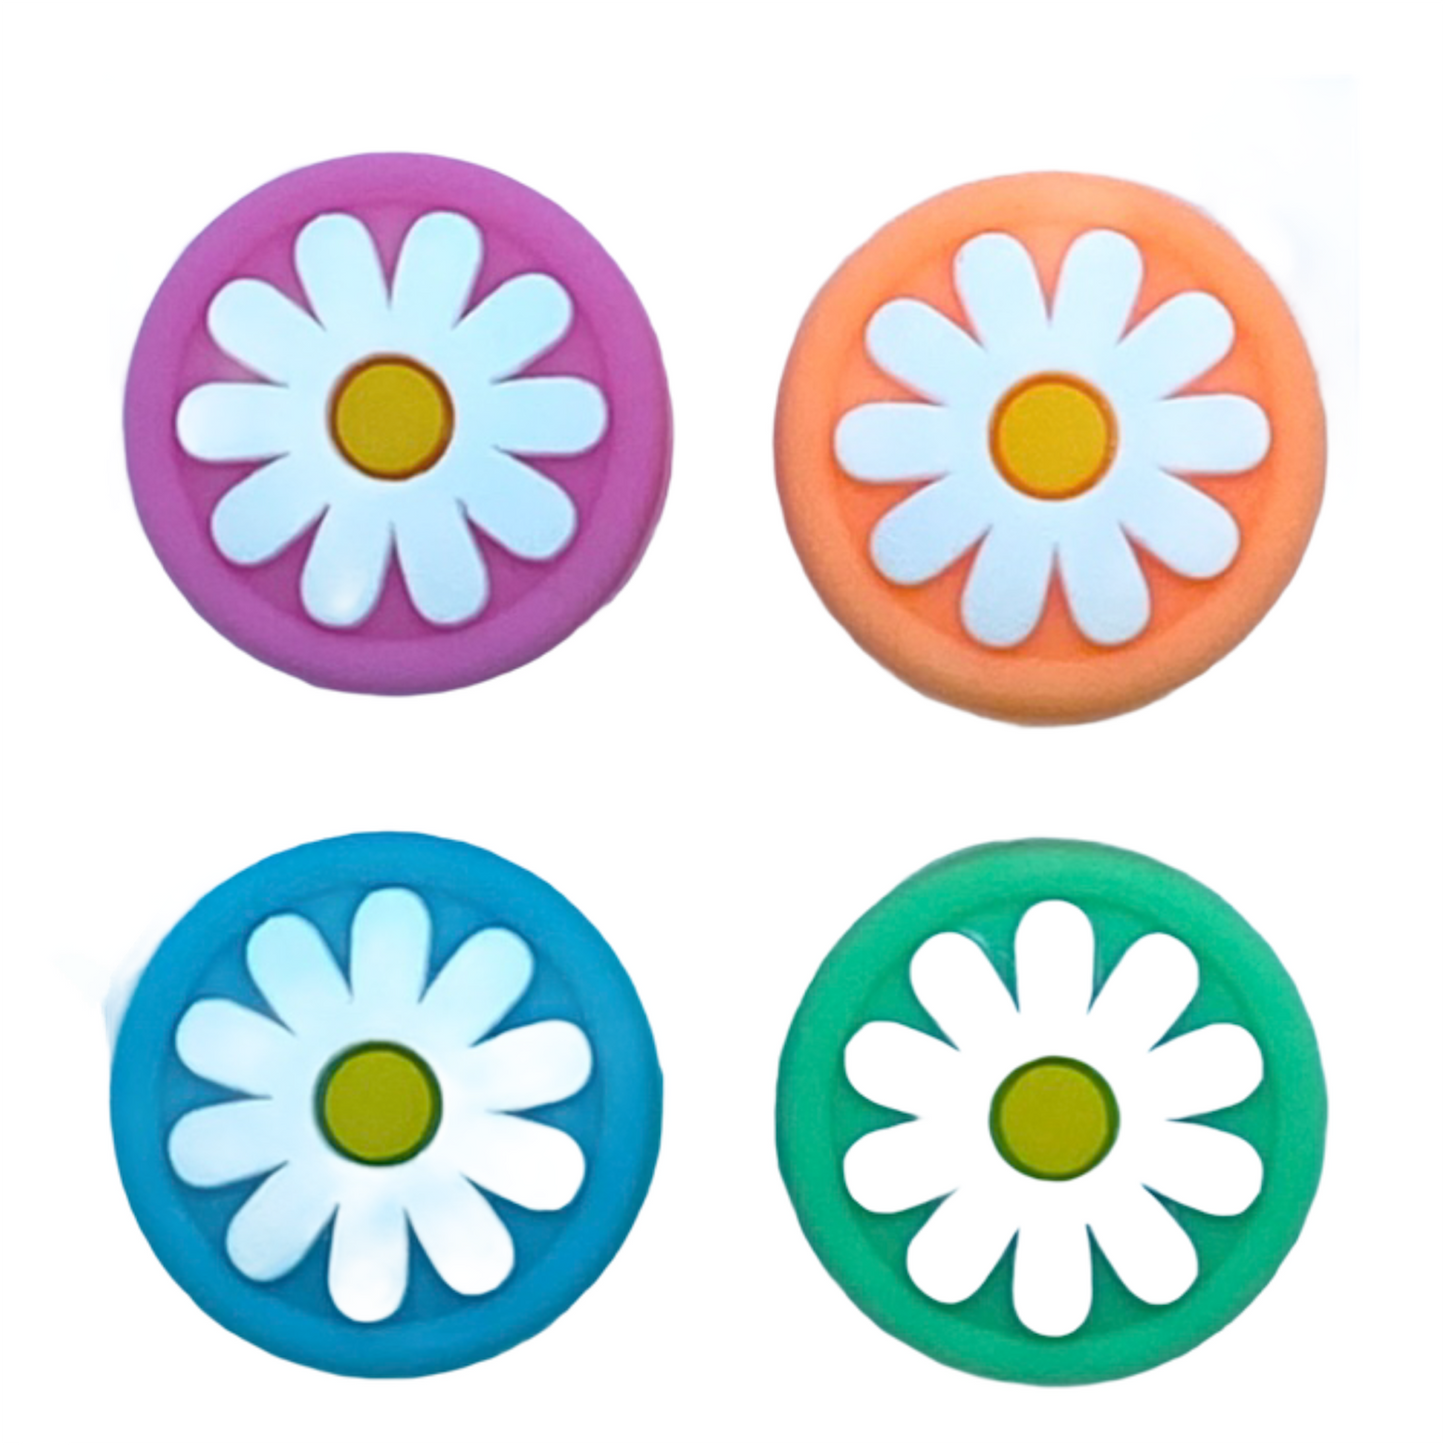 JenDore Pink Orange Green Blue 4Pcs Flower Silicone Thumb Grip Caps for Nintendo Switch